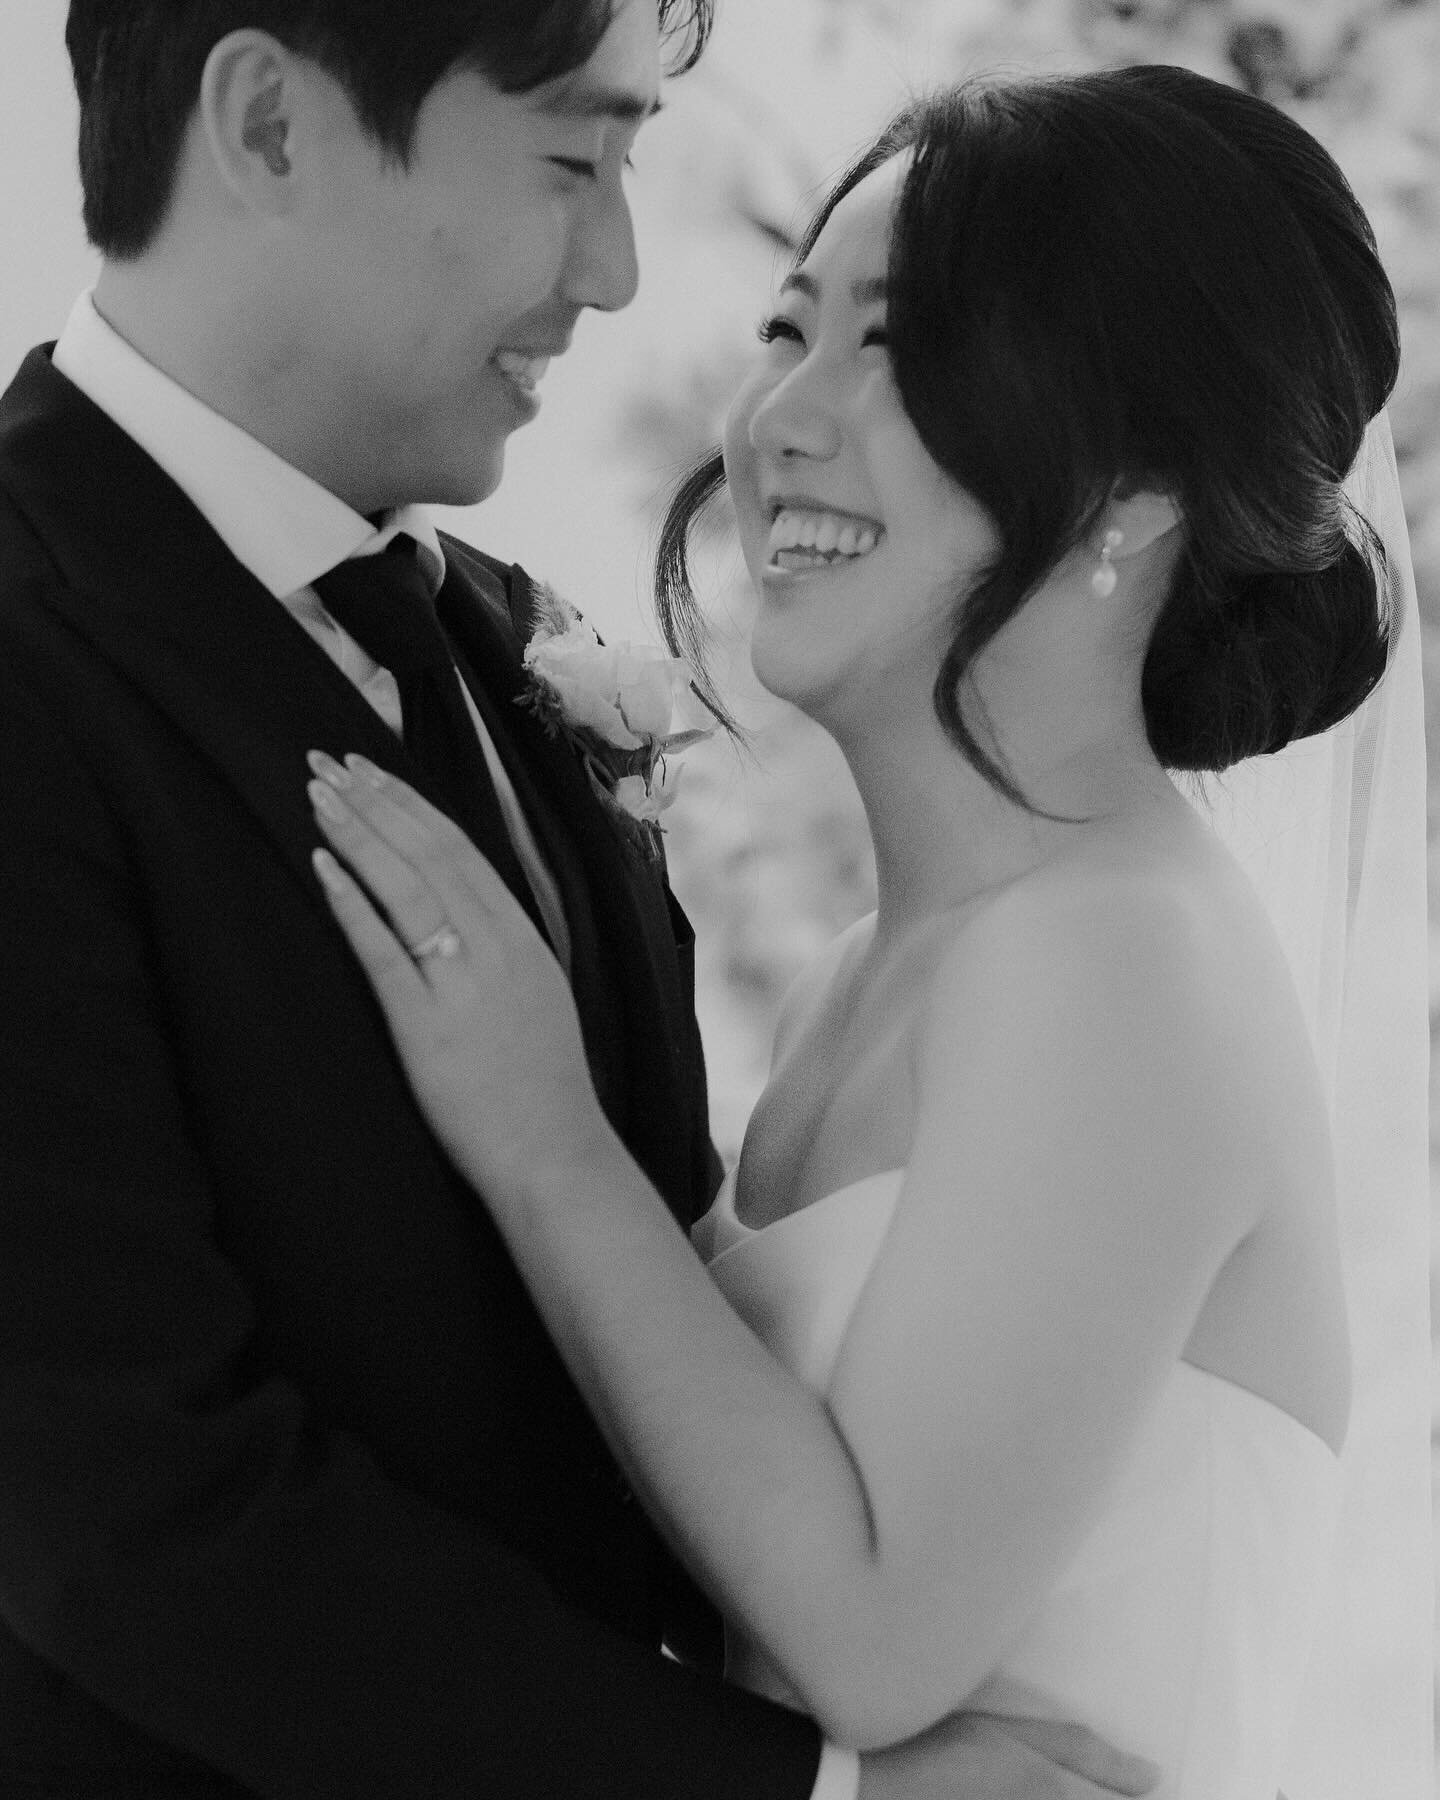 There&rsquo;s so much love and joy captured in these photos~ 🥹

I had such a great time dolling my beautiful bride up~ Funnily enough we found out while doing her makeup that we were both flying to Oahu the next day for the same number of days! We n